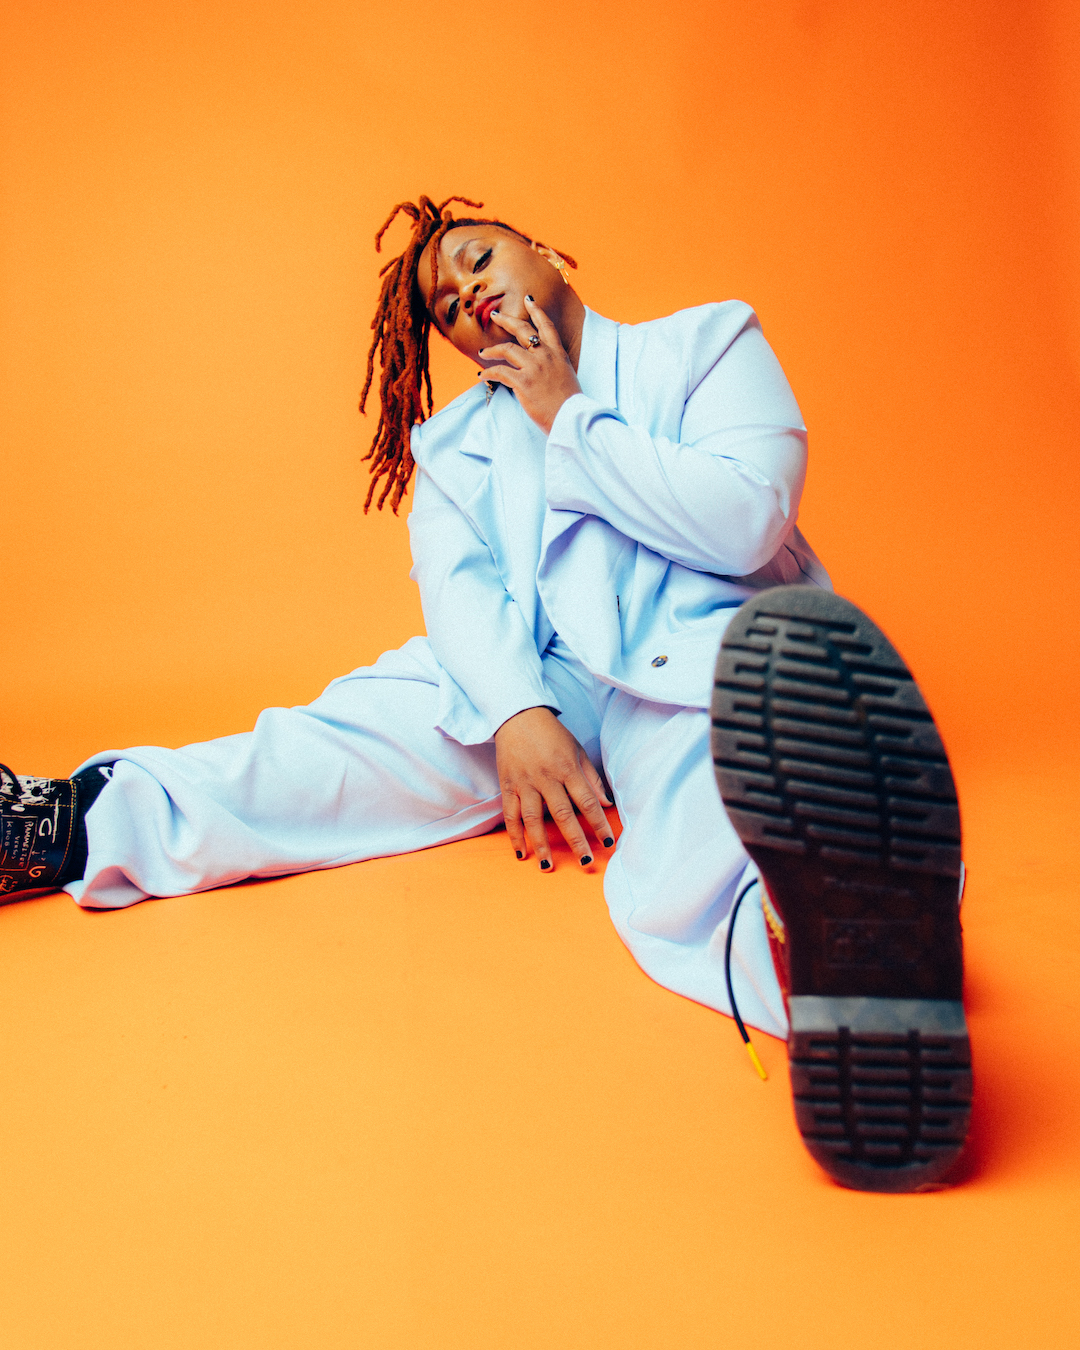 An African-American artist with red dreads wearing a pale blue suit and boots in a sit down pose in front of an orange backdrop.